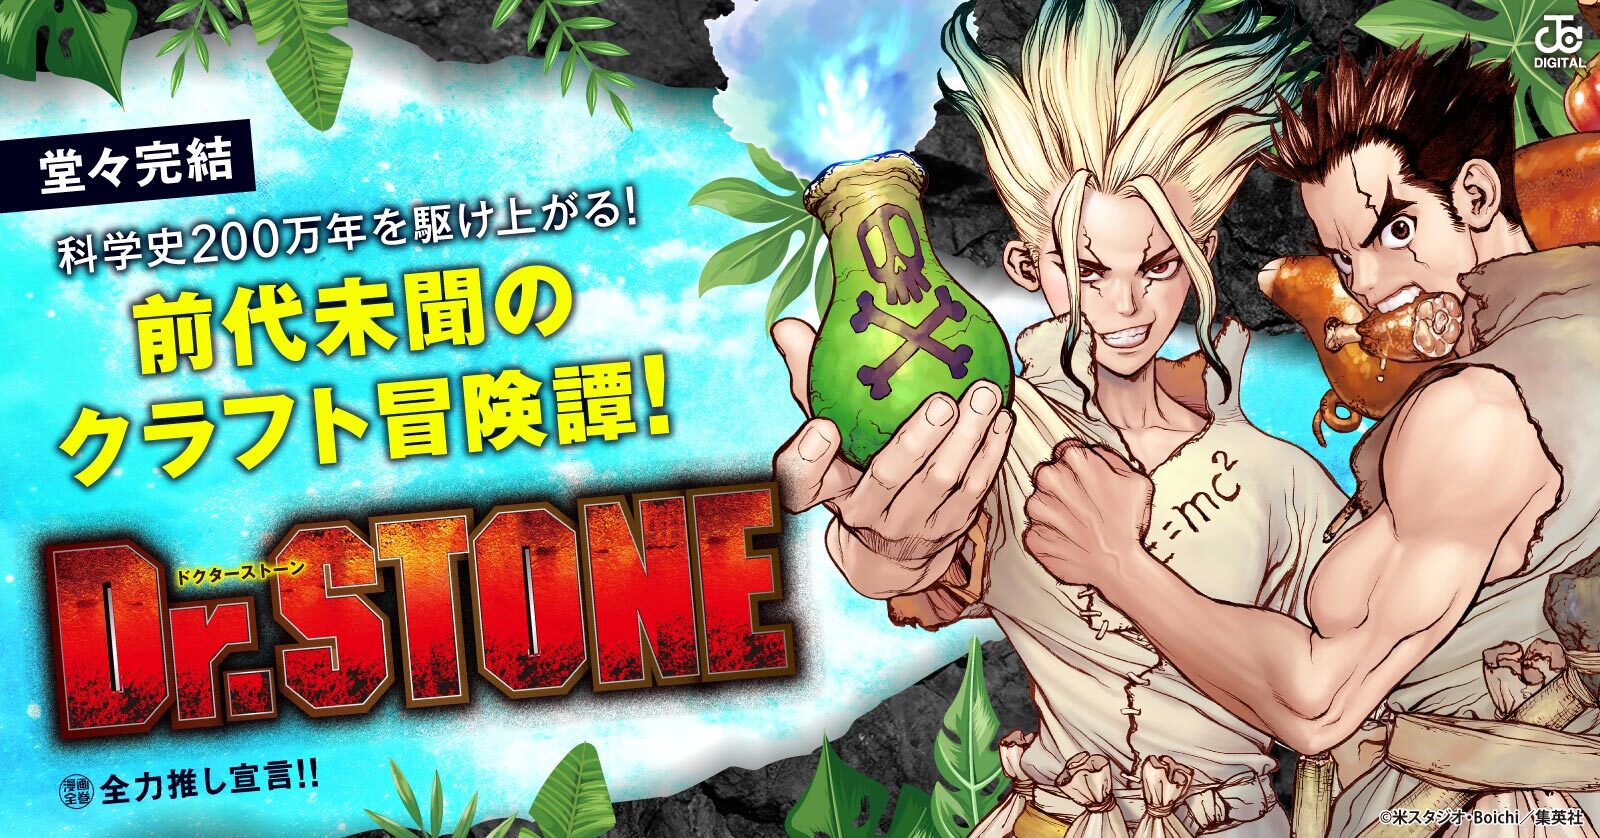 Dr.STONE 26 冊セット 全巻 | 漫画全巻ドットコム